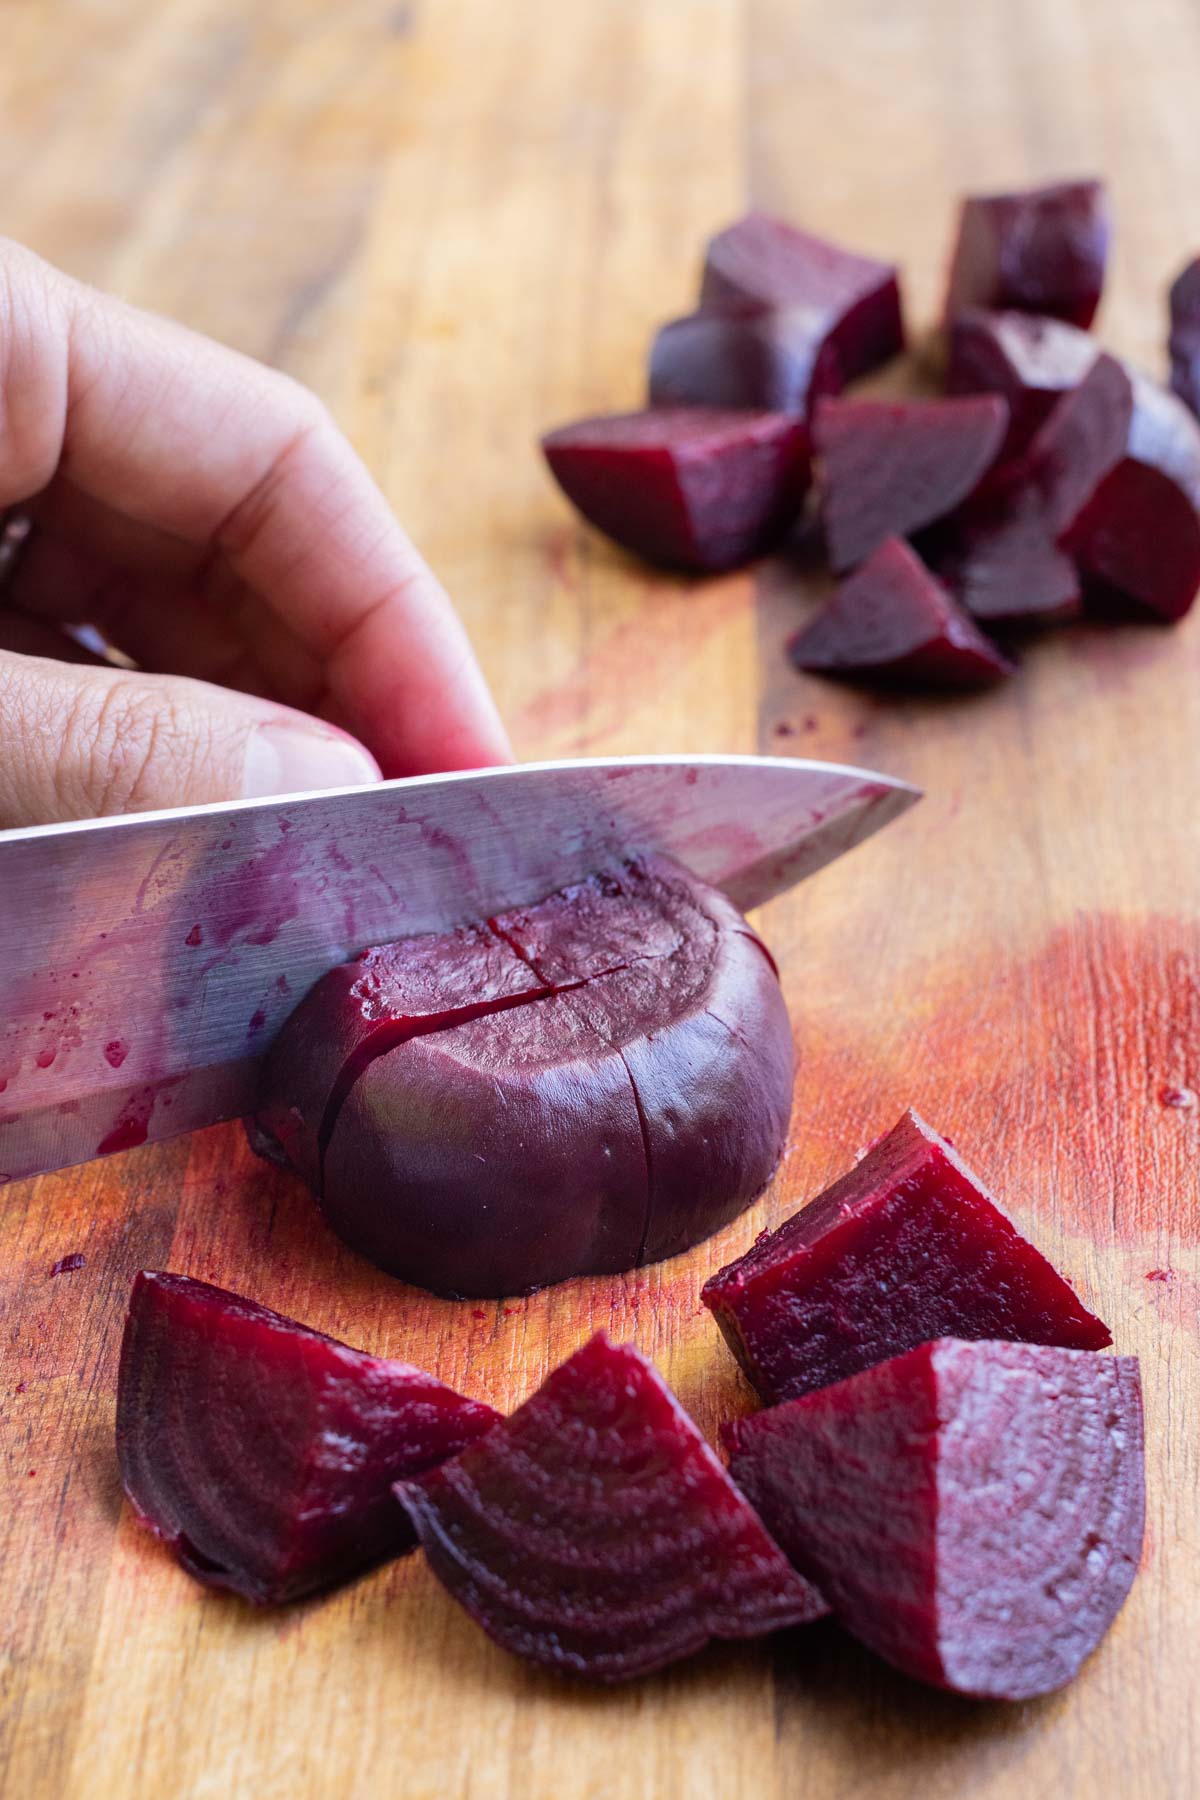 Roasted beets are sliced with a knife on a cutting board.